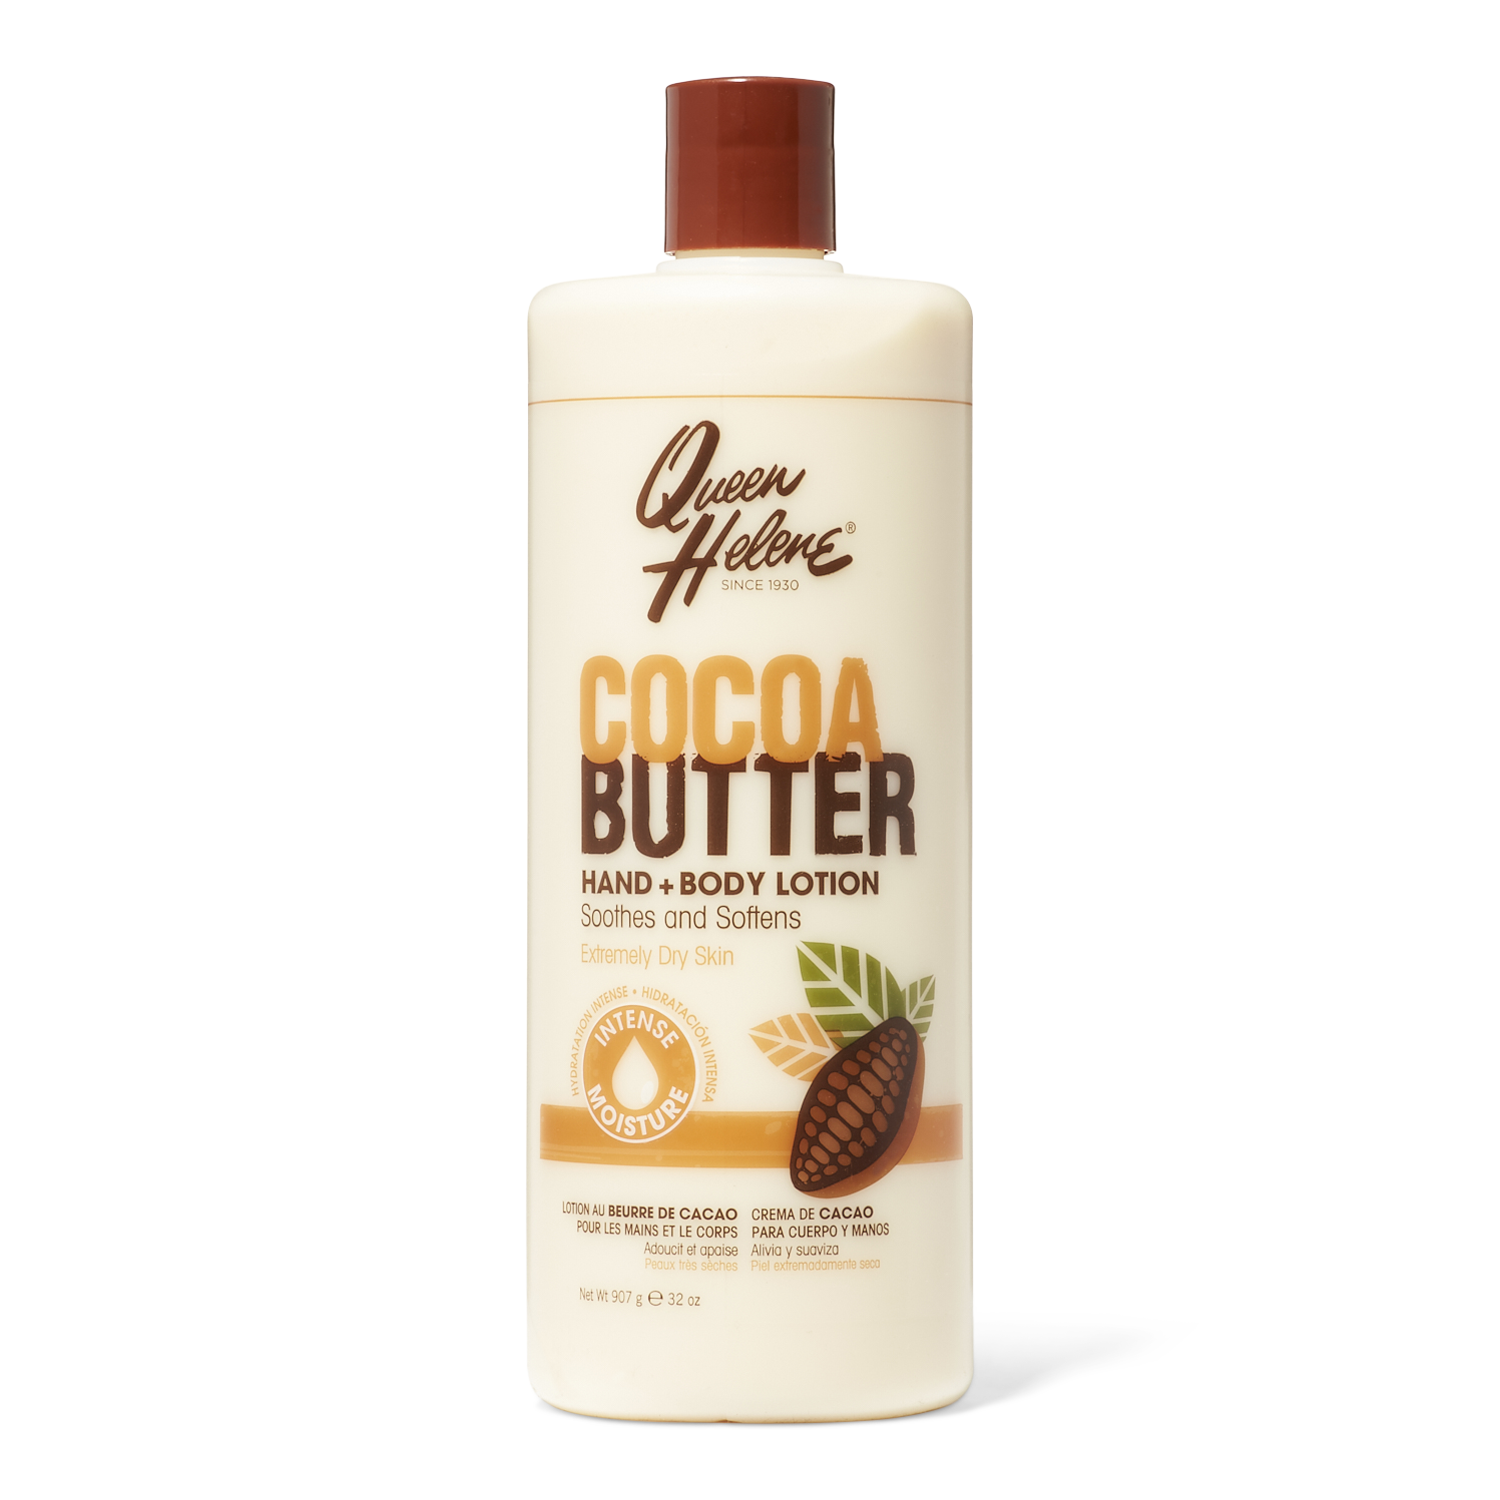 Queen Helene Cocoa Butter Lotion at Beauty